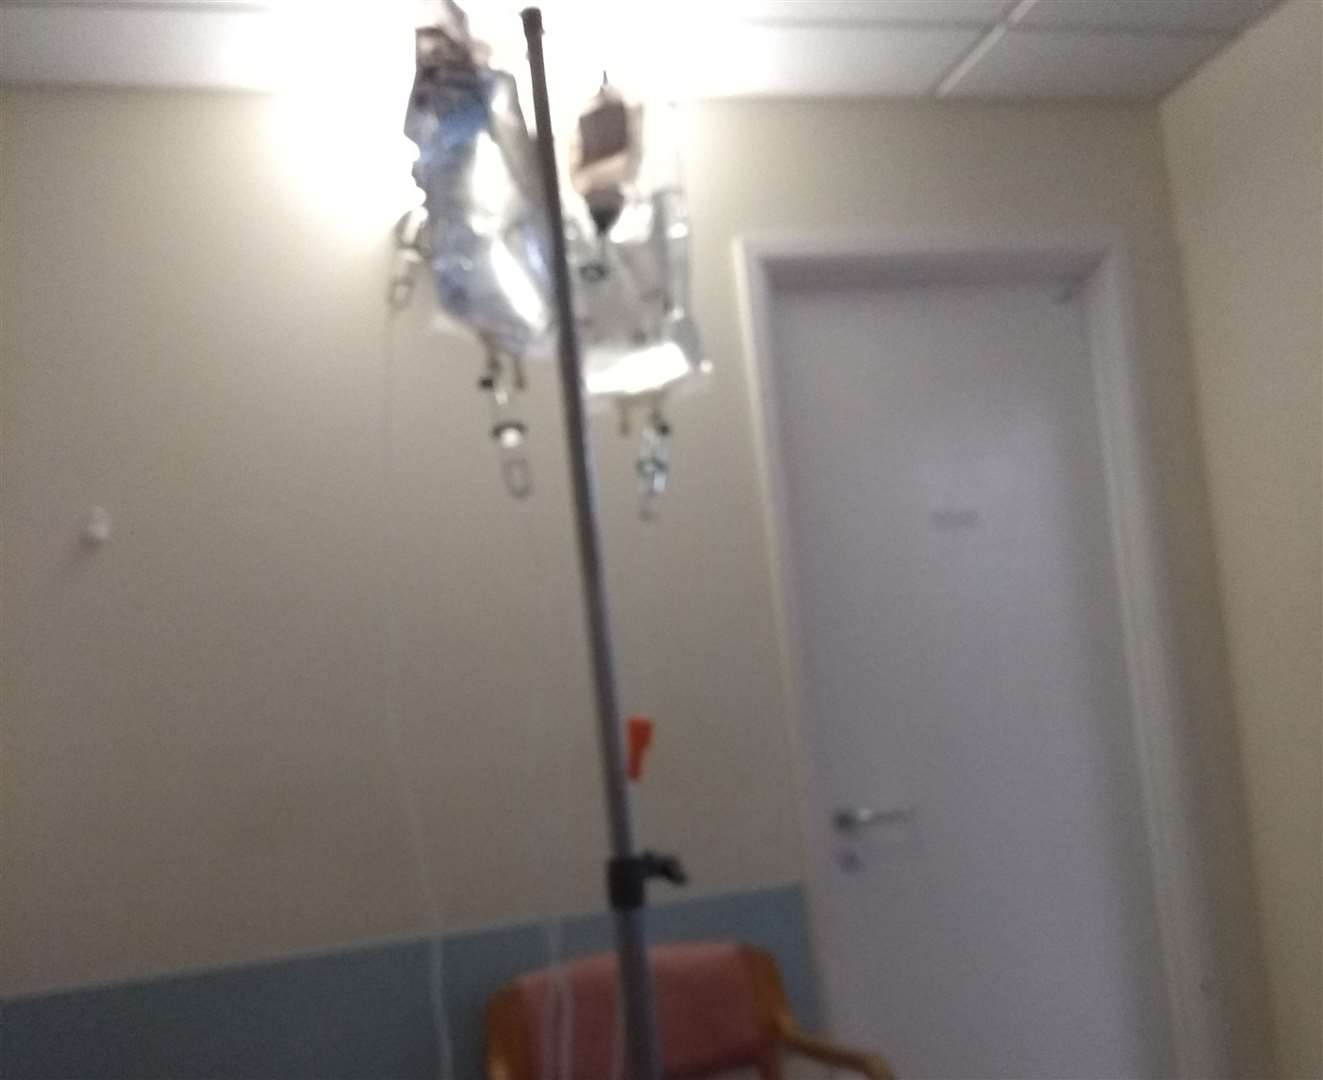 The patient took this picture of a drip stand being used by herself and two others at the hospital